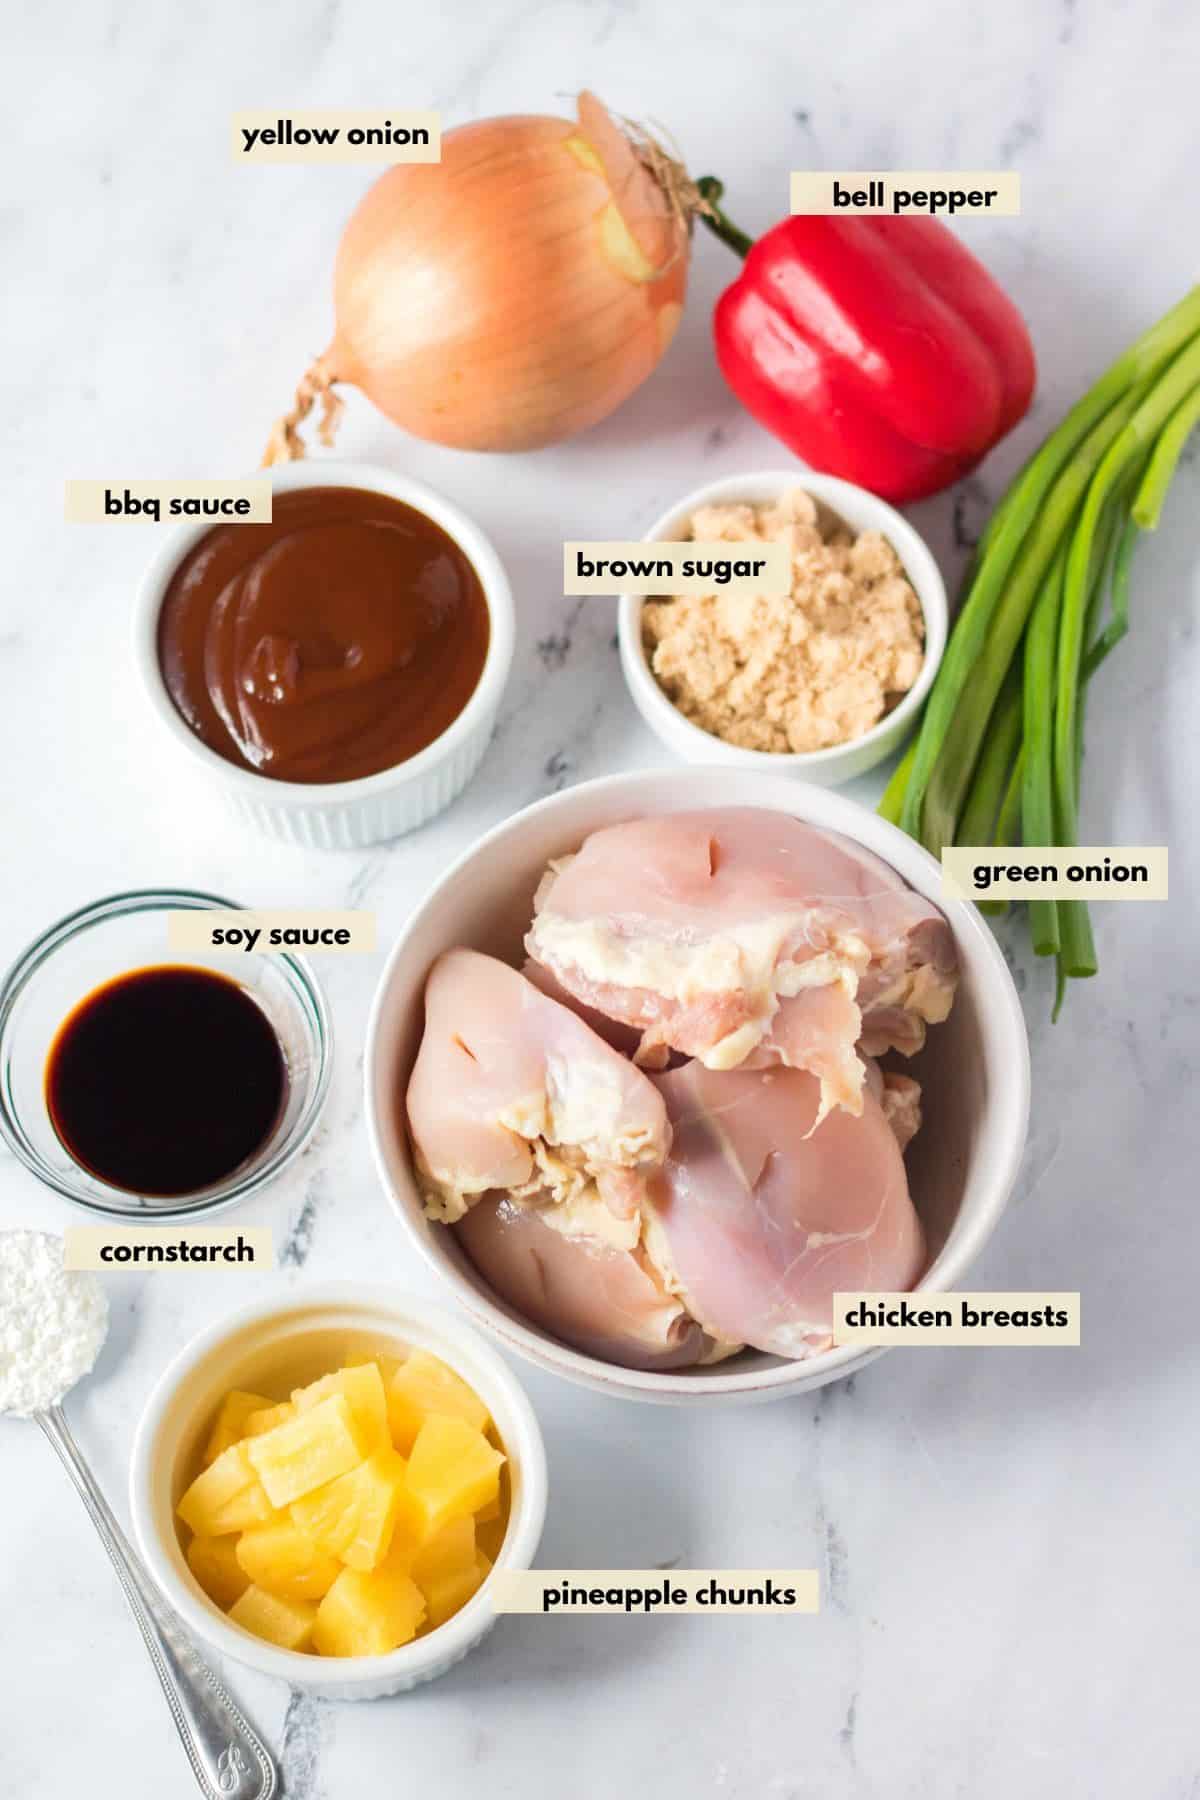 Ingredients for Hawaiian chicken are pineapple, brown sugar, onion, bell pepper, green onions, bbq sauce, soy sauce, brown sugar.